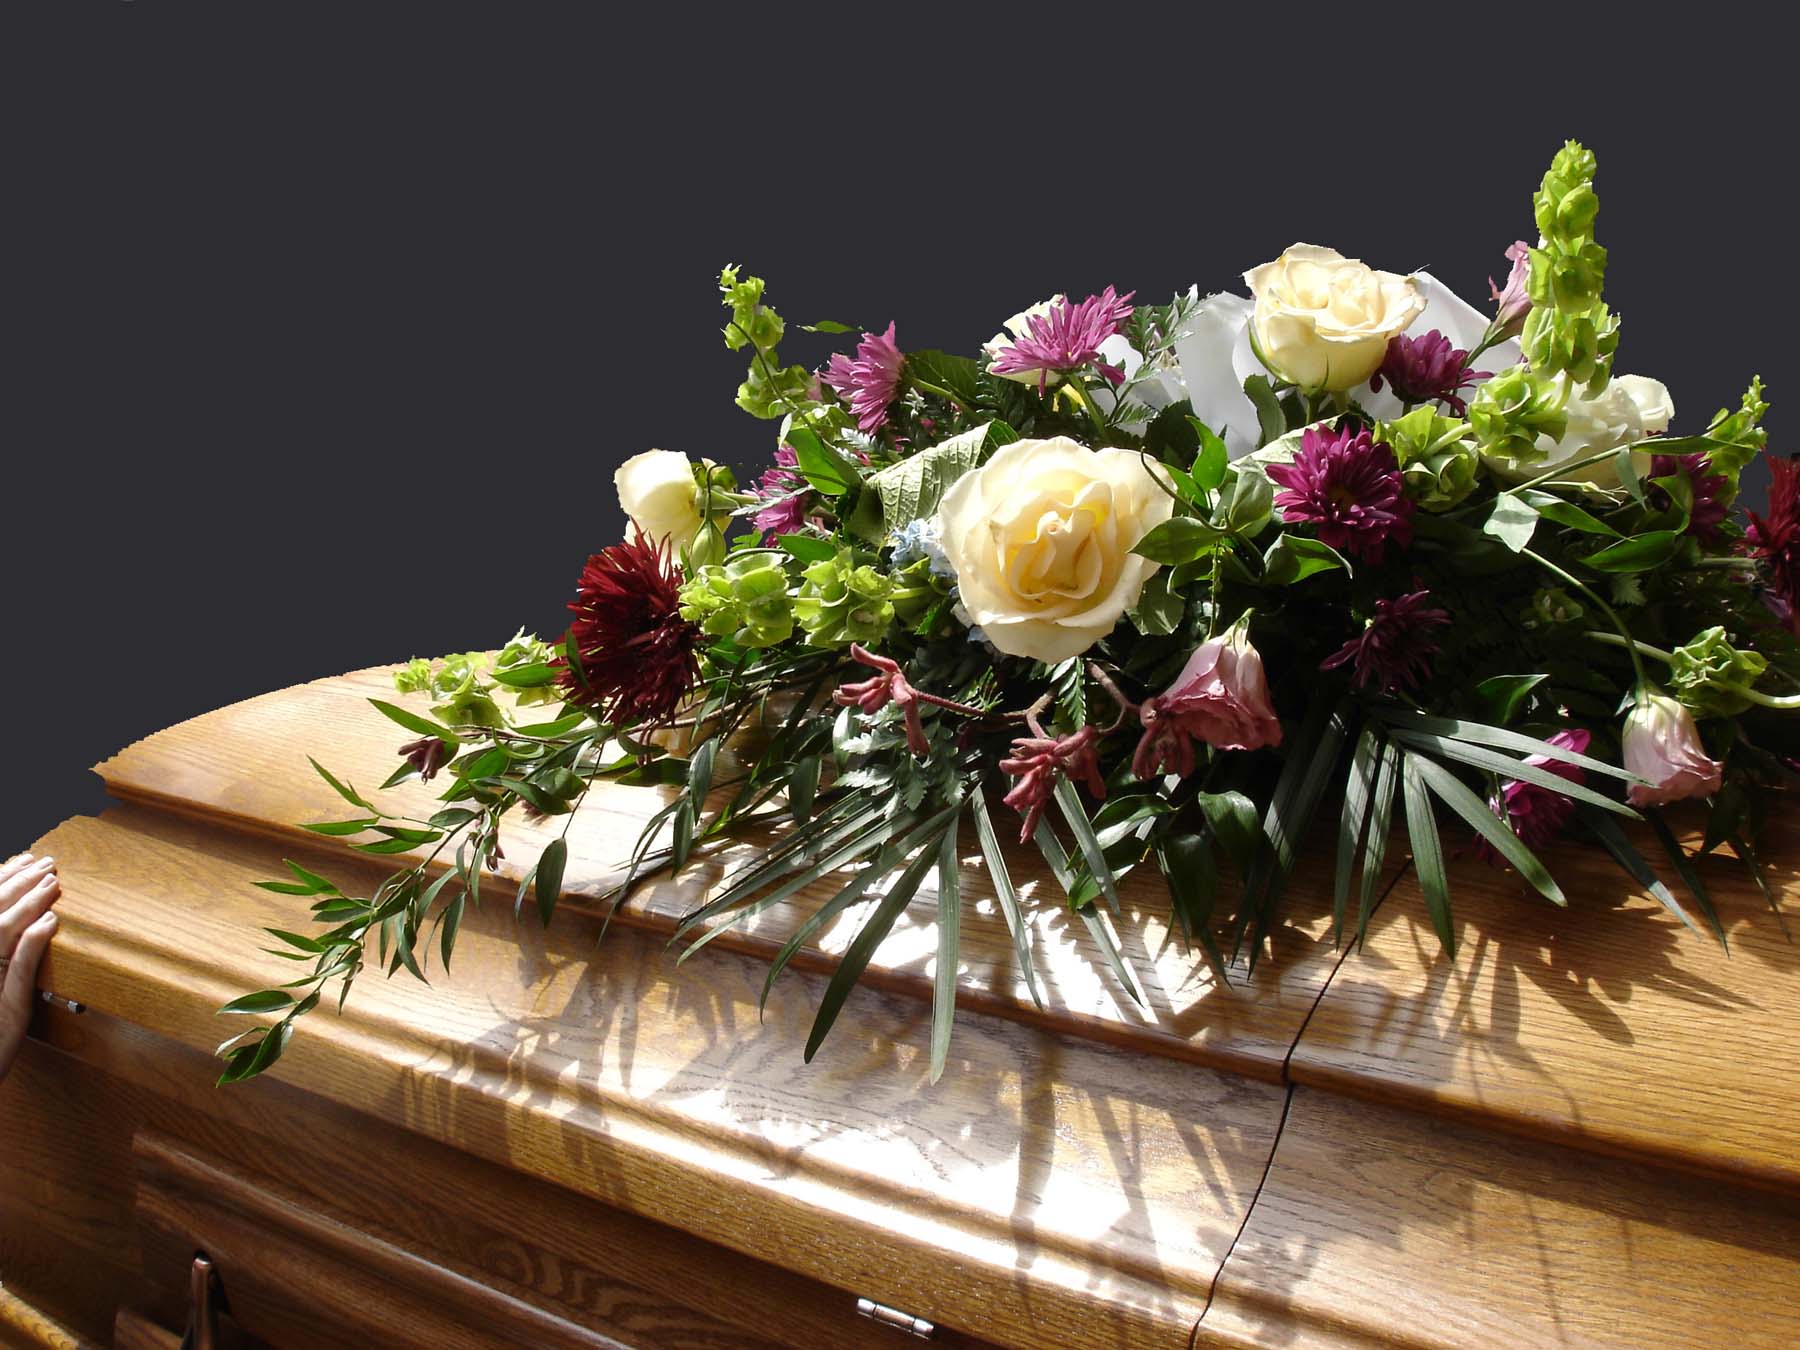 Close-up of flowers laid on top of a wooden casket.